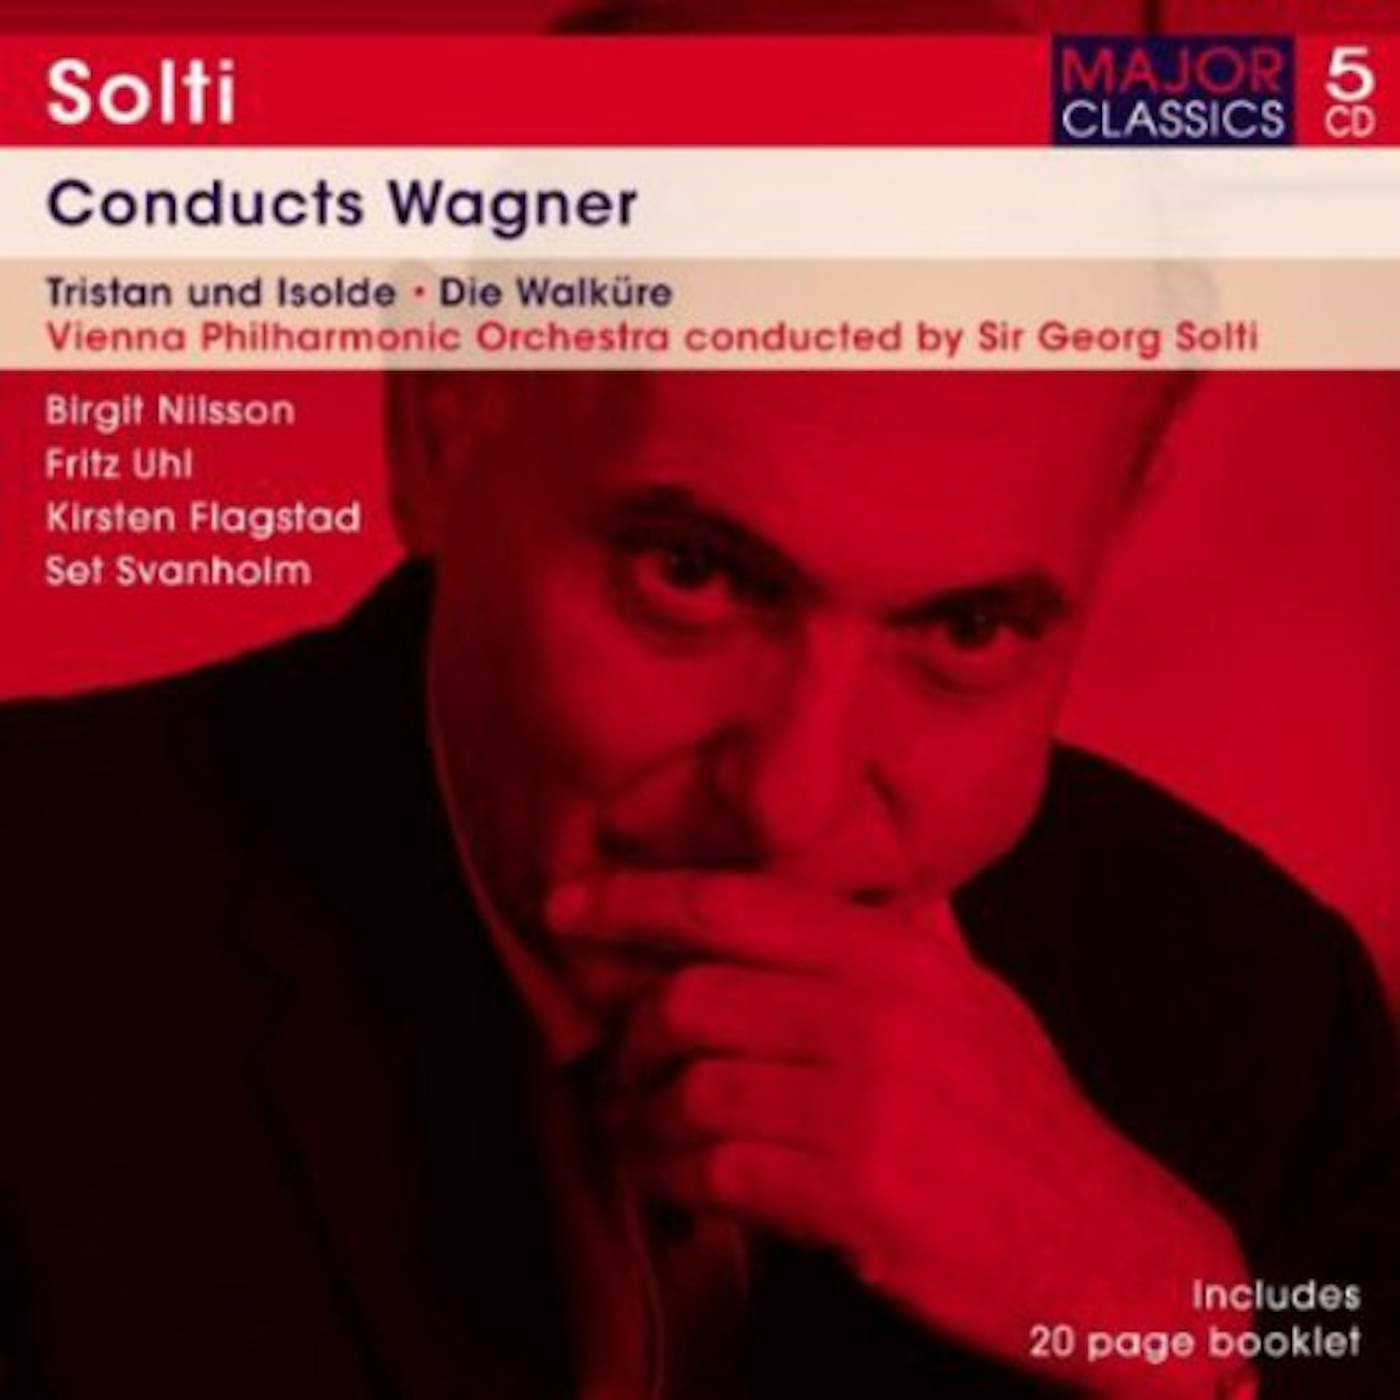 Solti PLAYS WAGNER CD